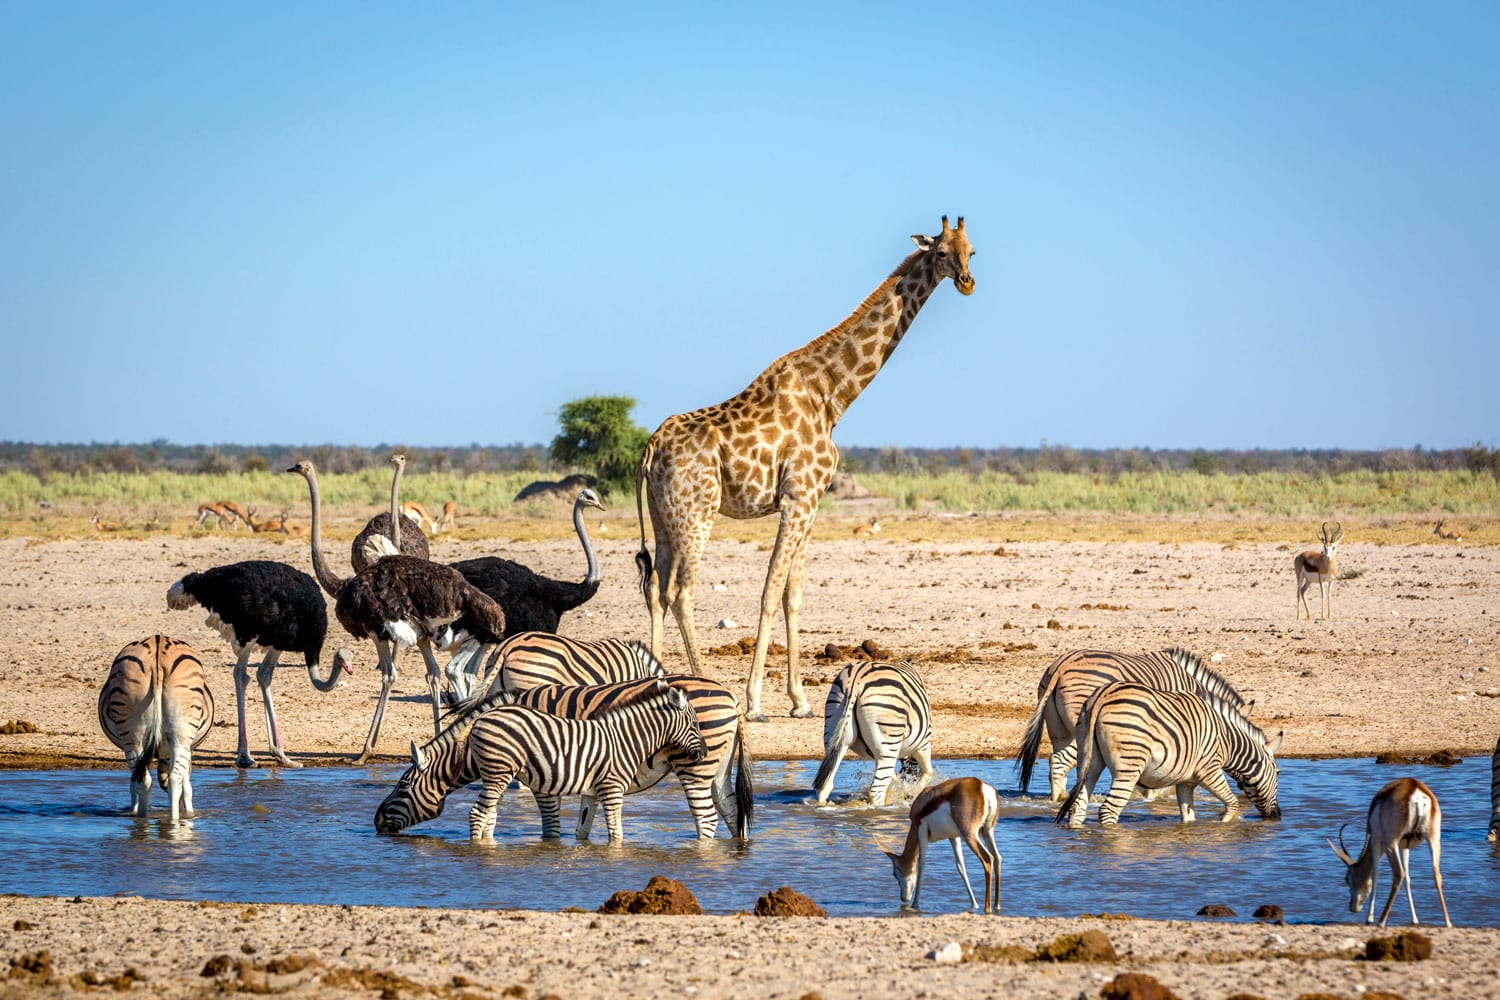 Animals drinking water in a waterhole inside the Etosha National Park, Namibia, Africa